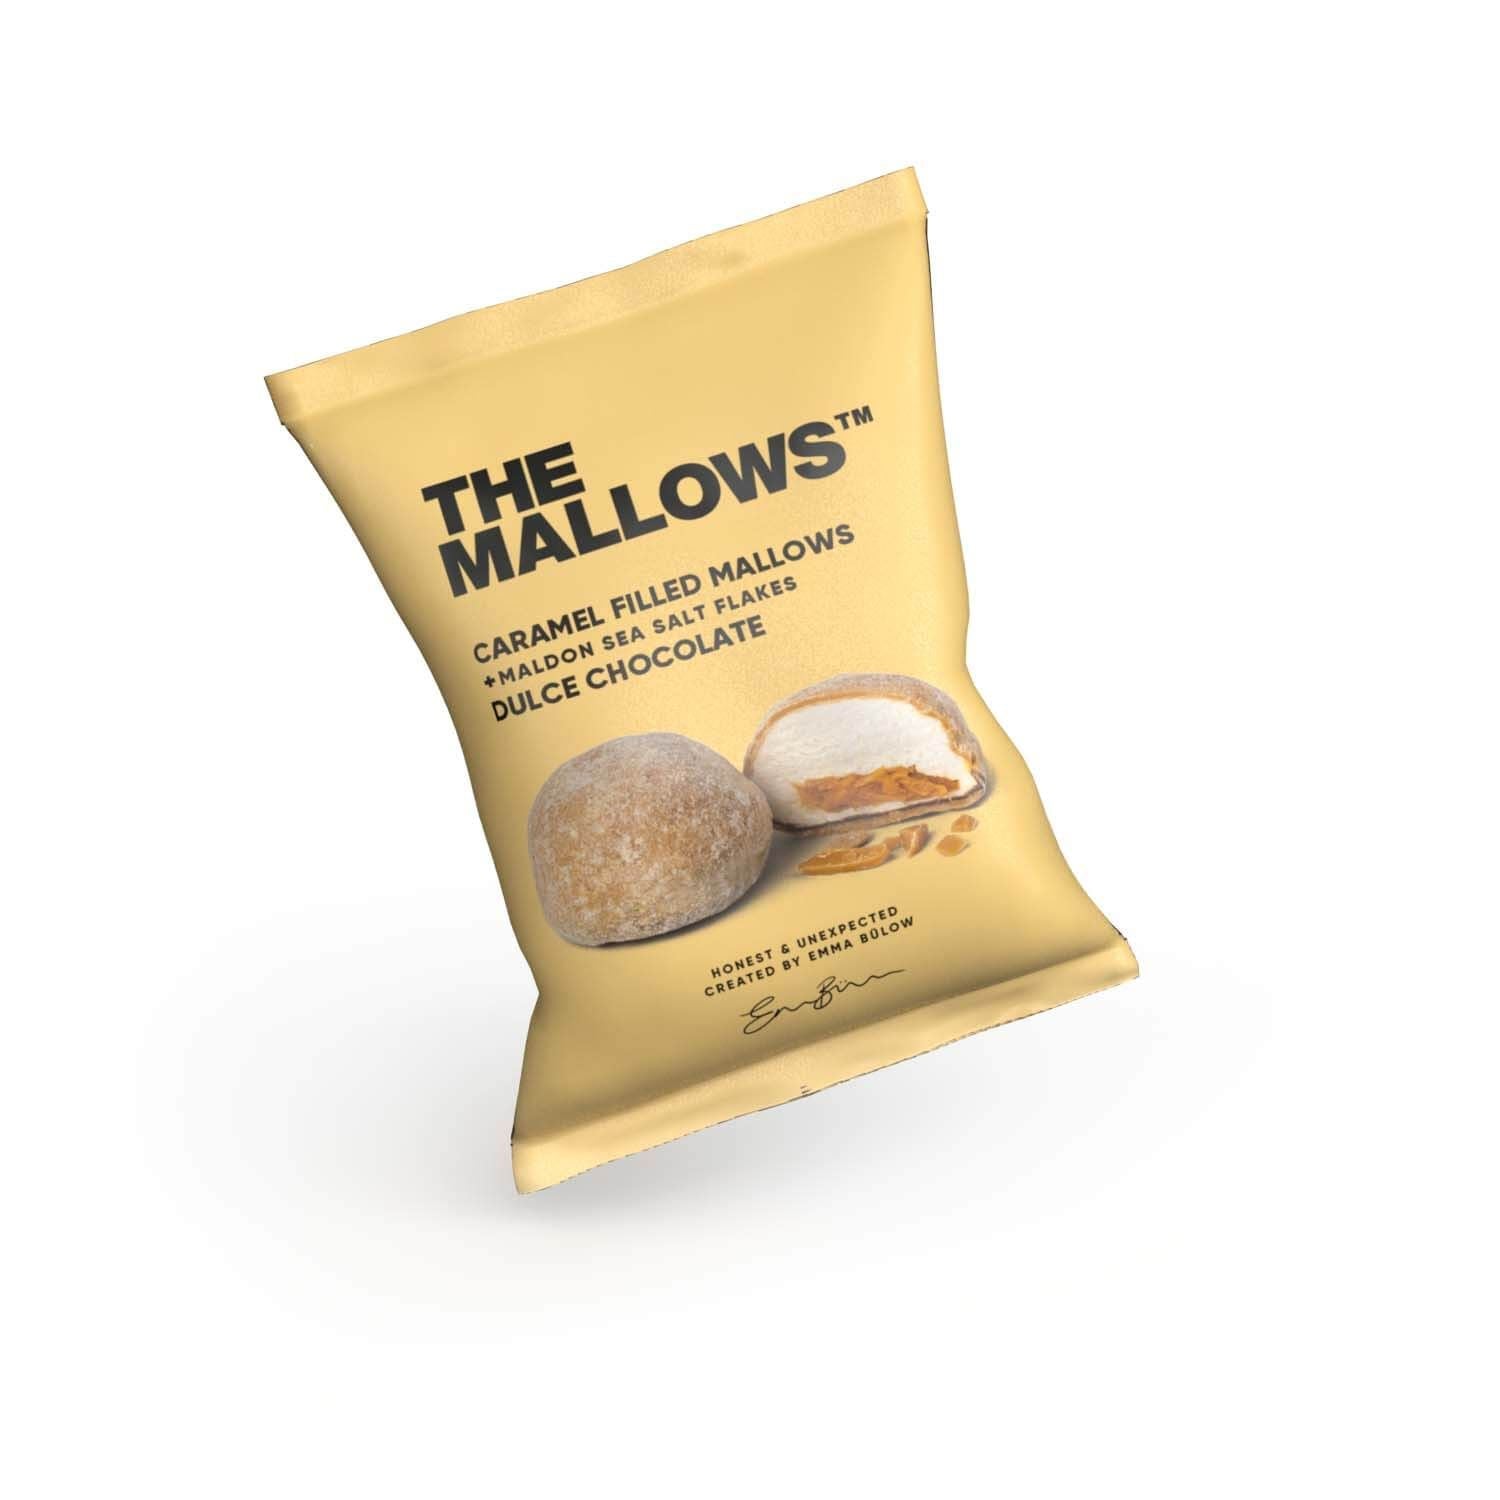 The Mallows Marshmallows With Caramel Filling & Chocolate Dulce Chocolate, 18g